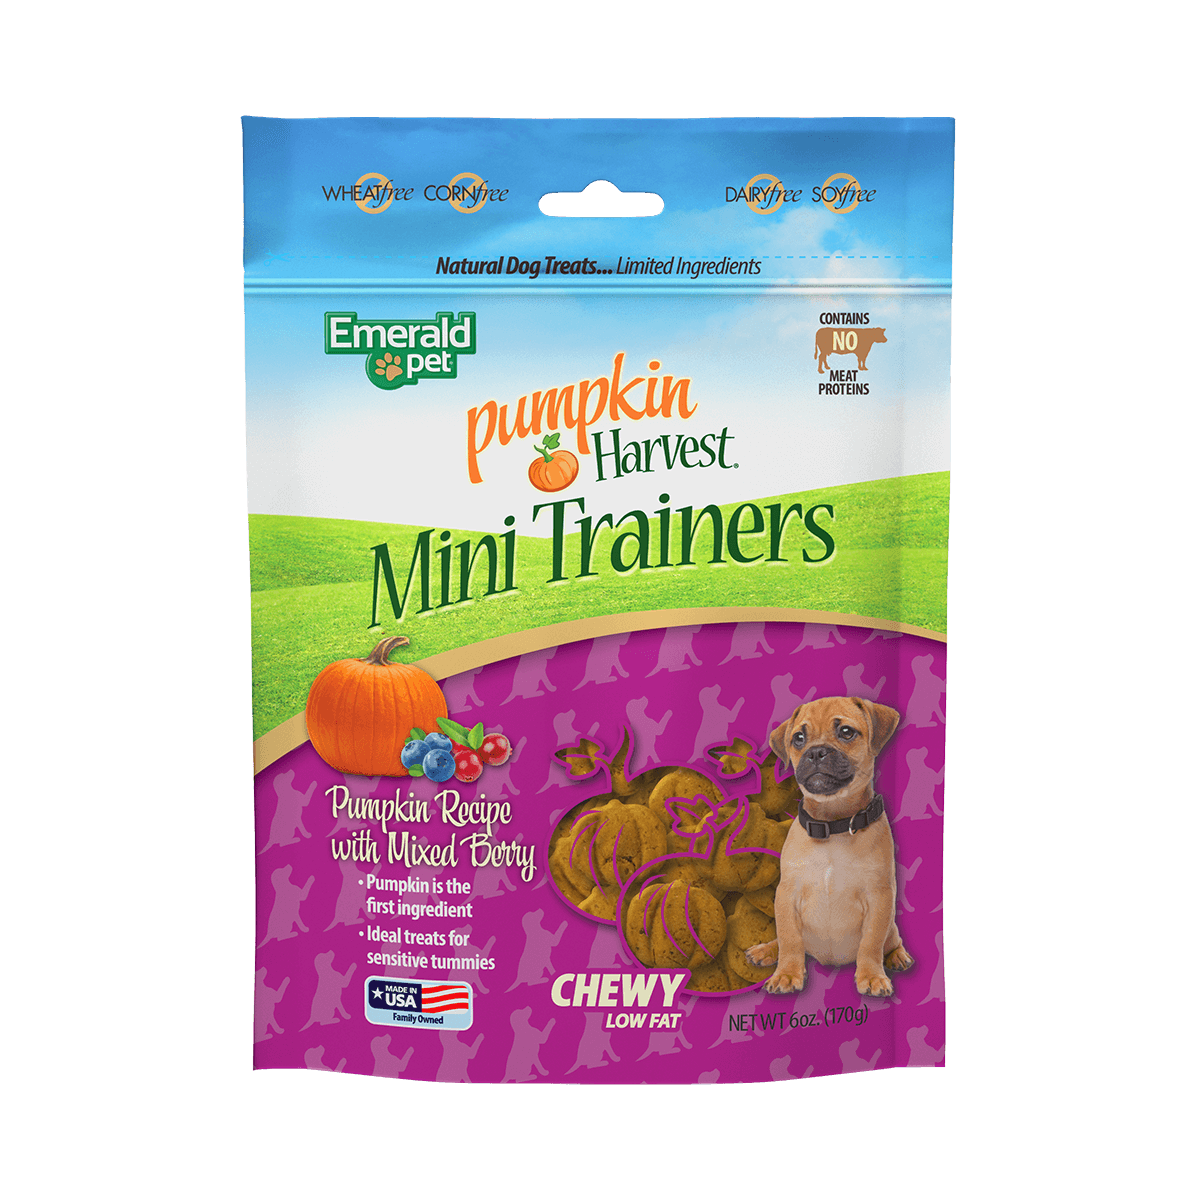 Picture of Emerald Pet 850039167102 6 oz Pumpkin Harvest Trainers Mixed Berry Chewy Dog Treats